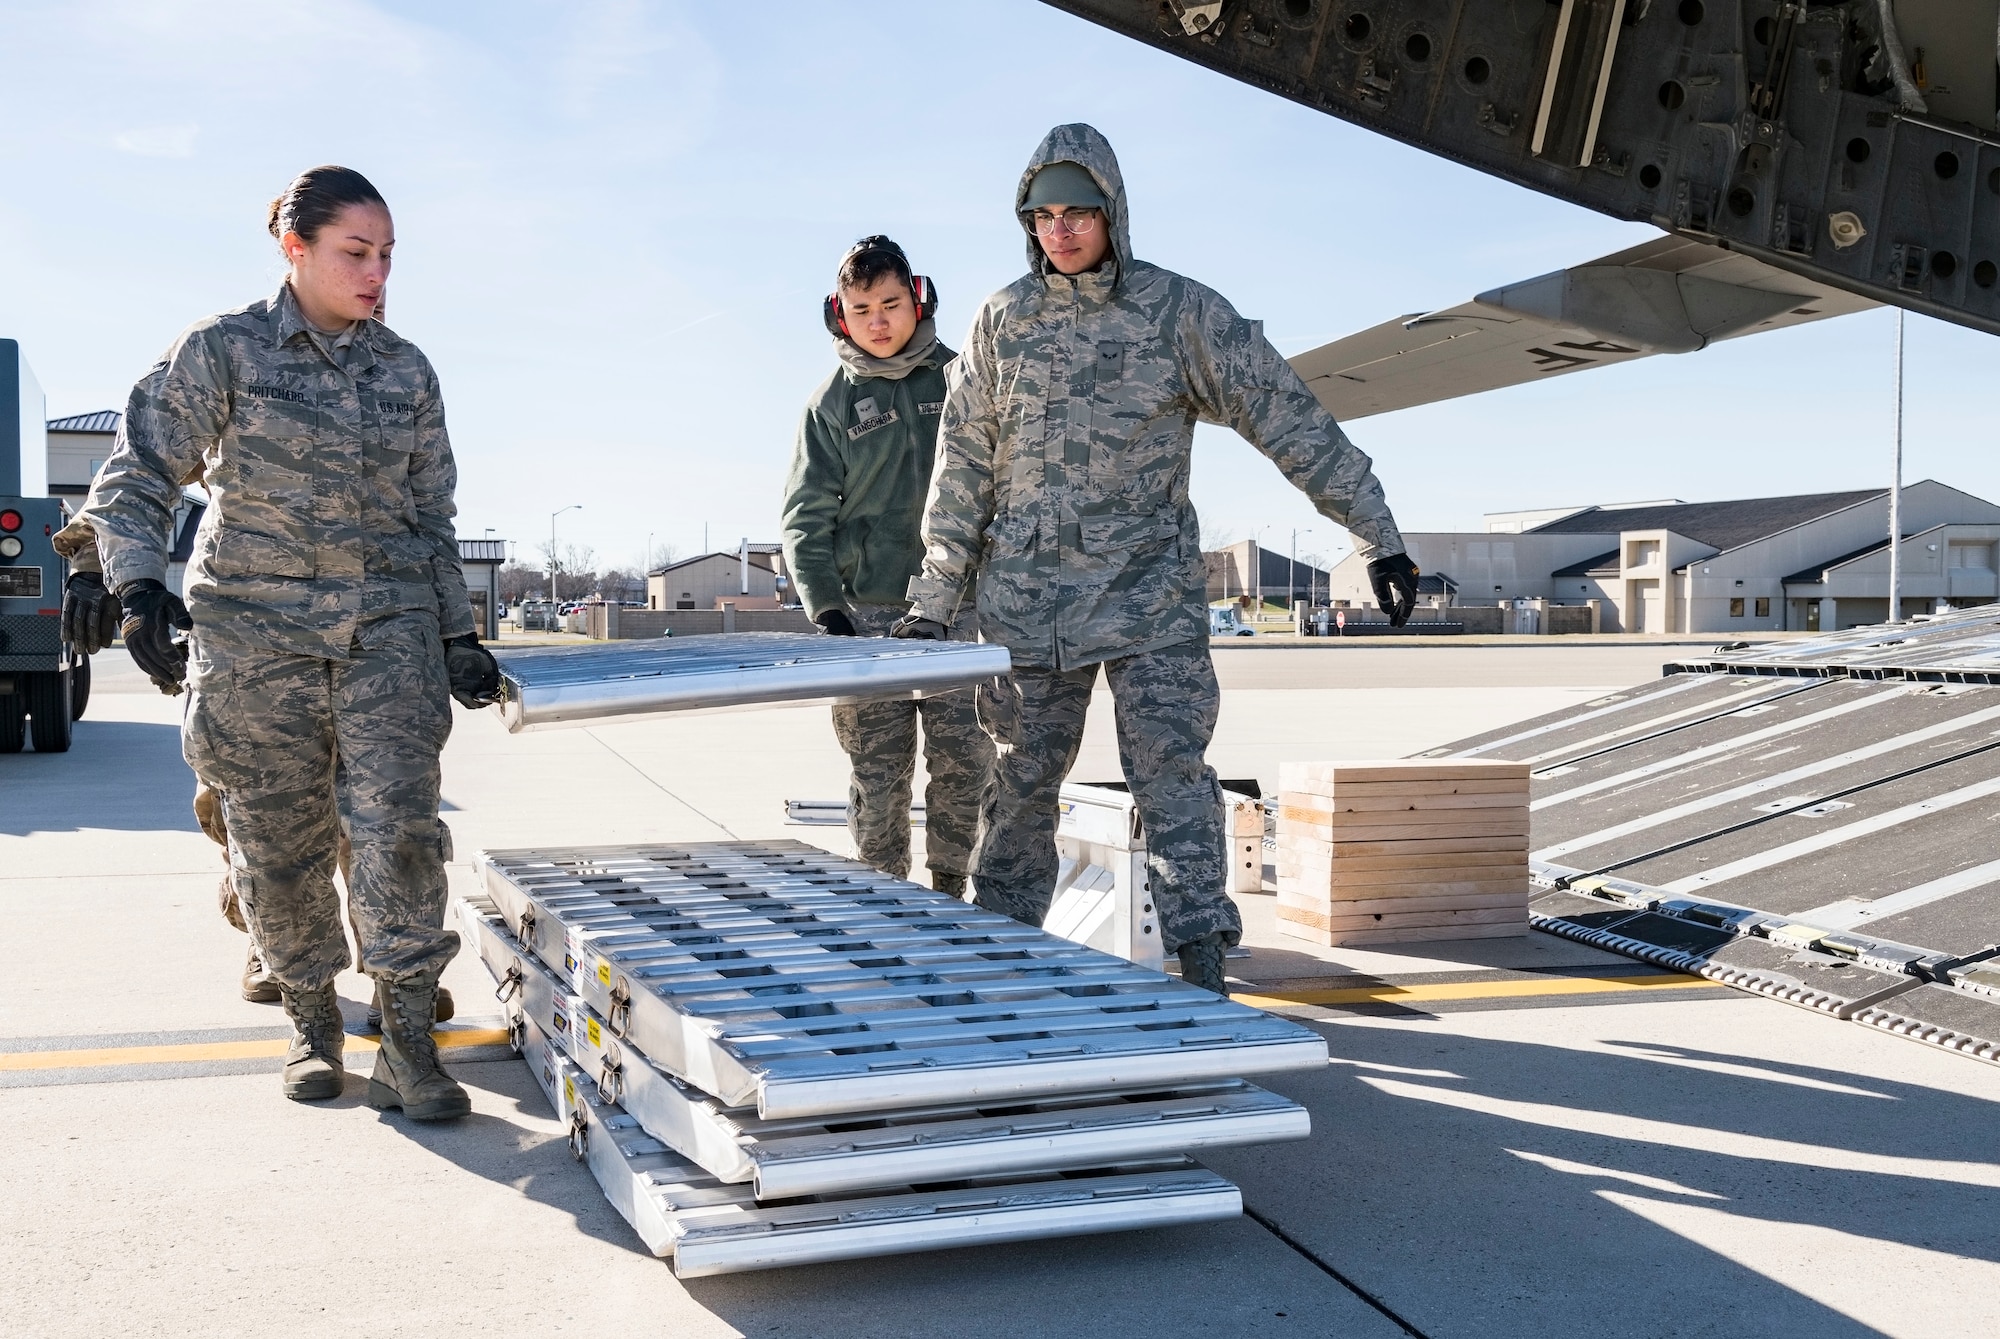 Ramp operations specialists assigned to the 436th Aerial Port Squadron carry the ramp sections of DOMOPS Airlift Modular Approach Shoring Jan. 11, 2019, at Dover Air Force Base, Del. The modular shoring was used to upload five vehicles belonging to the Delaware National Guard's 31st Civil Support Team, Weapons of Mass Destruction headquartered in Smyrna, Del. The vehicles and team members were airlifted by a C-17 to support the Florida National Guard during a large-scale training exercise Jan. 14-18. The 31st CST maintains the capability to mitigate the consequences of any WMD or Nuclear, Biological, and Chemical event, whether natural or man-made. They are experts in WMD effects and NBC defense operations. (U.S. Air Force photo by Roland Balik)